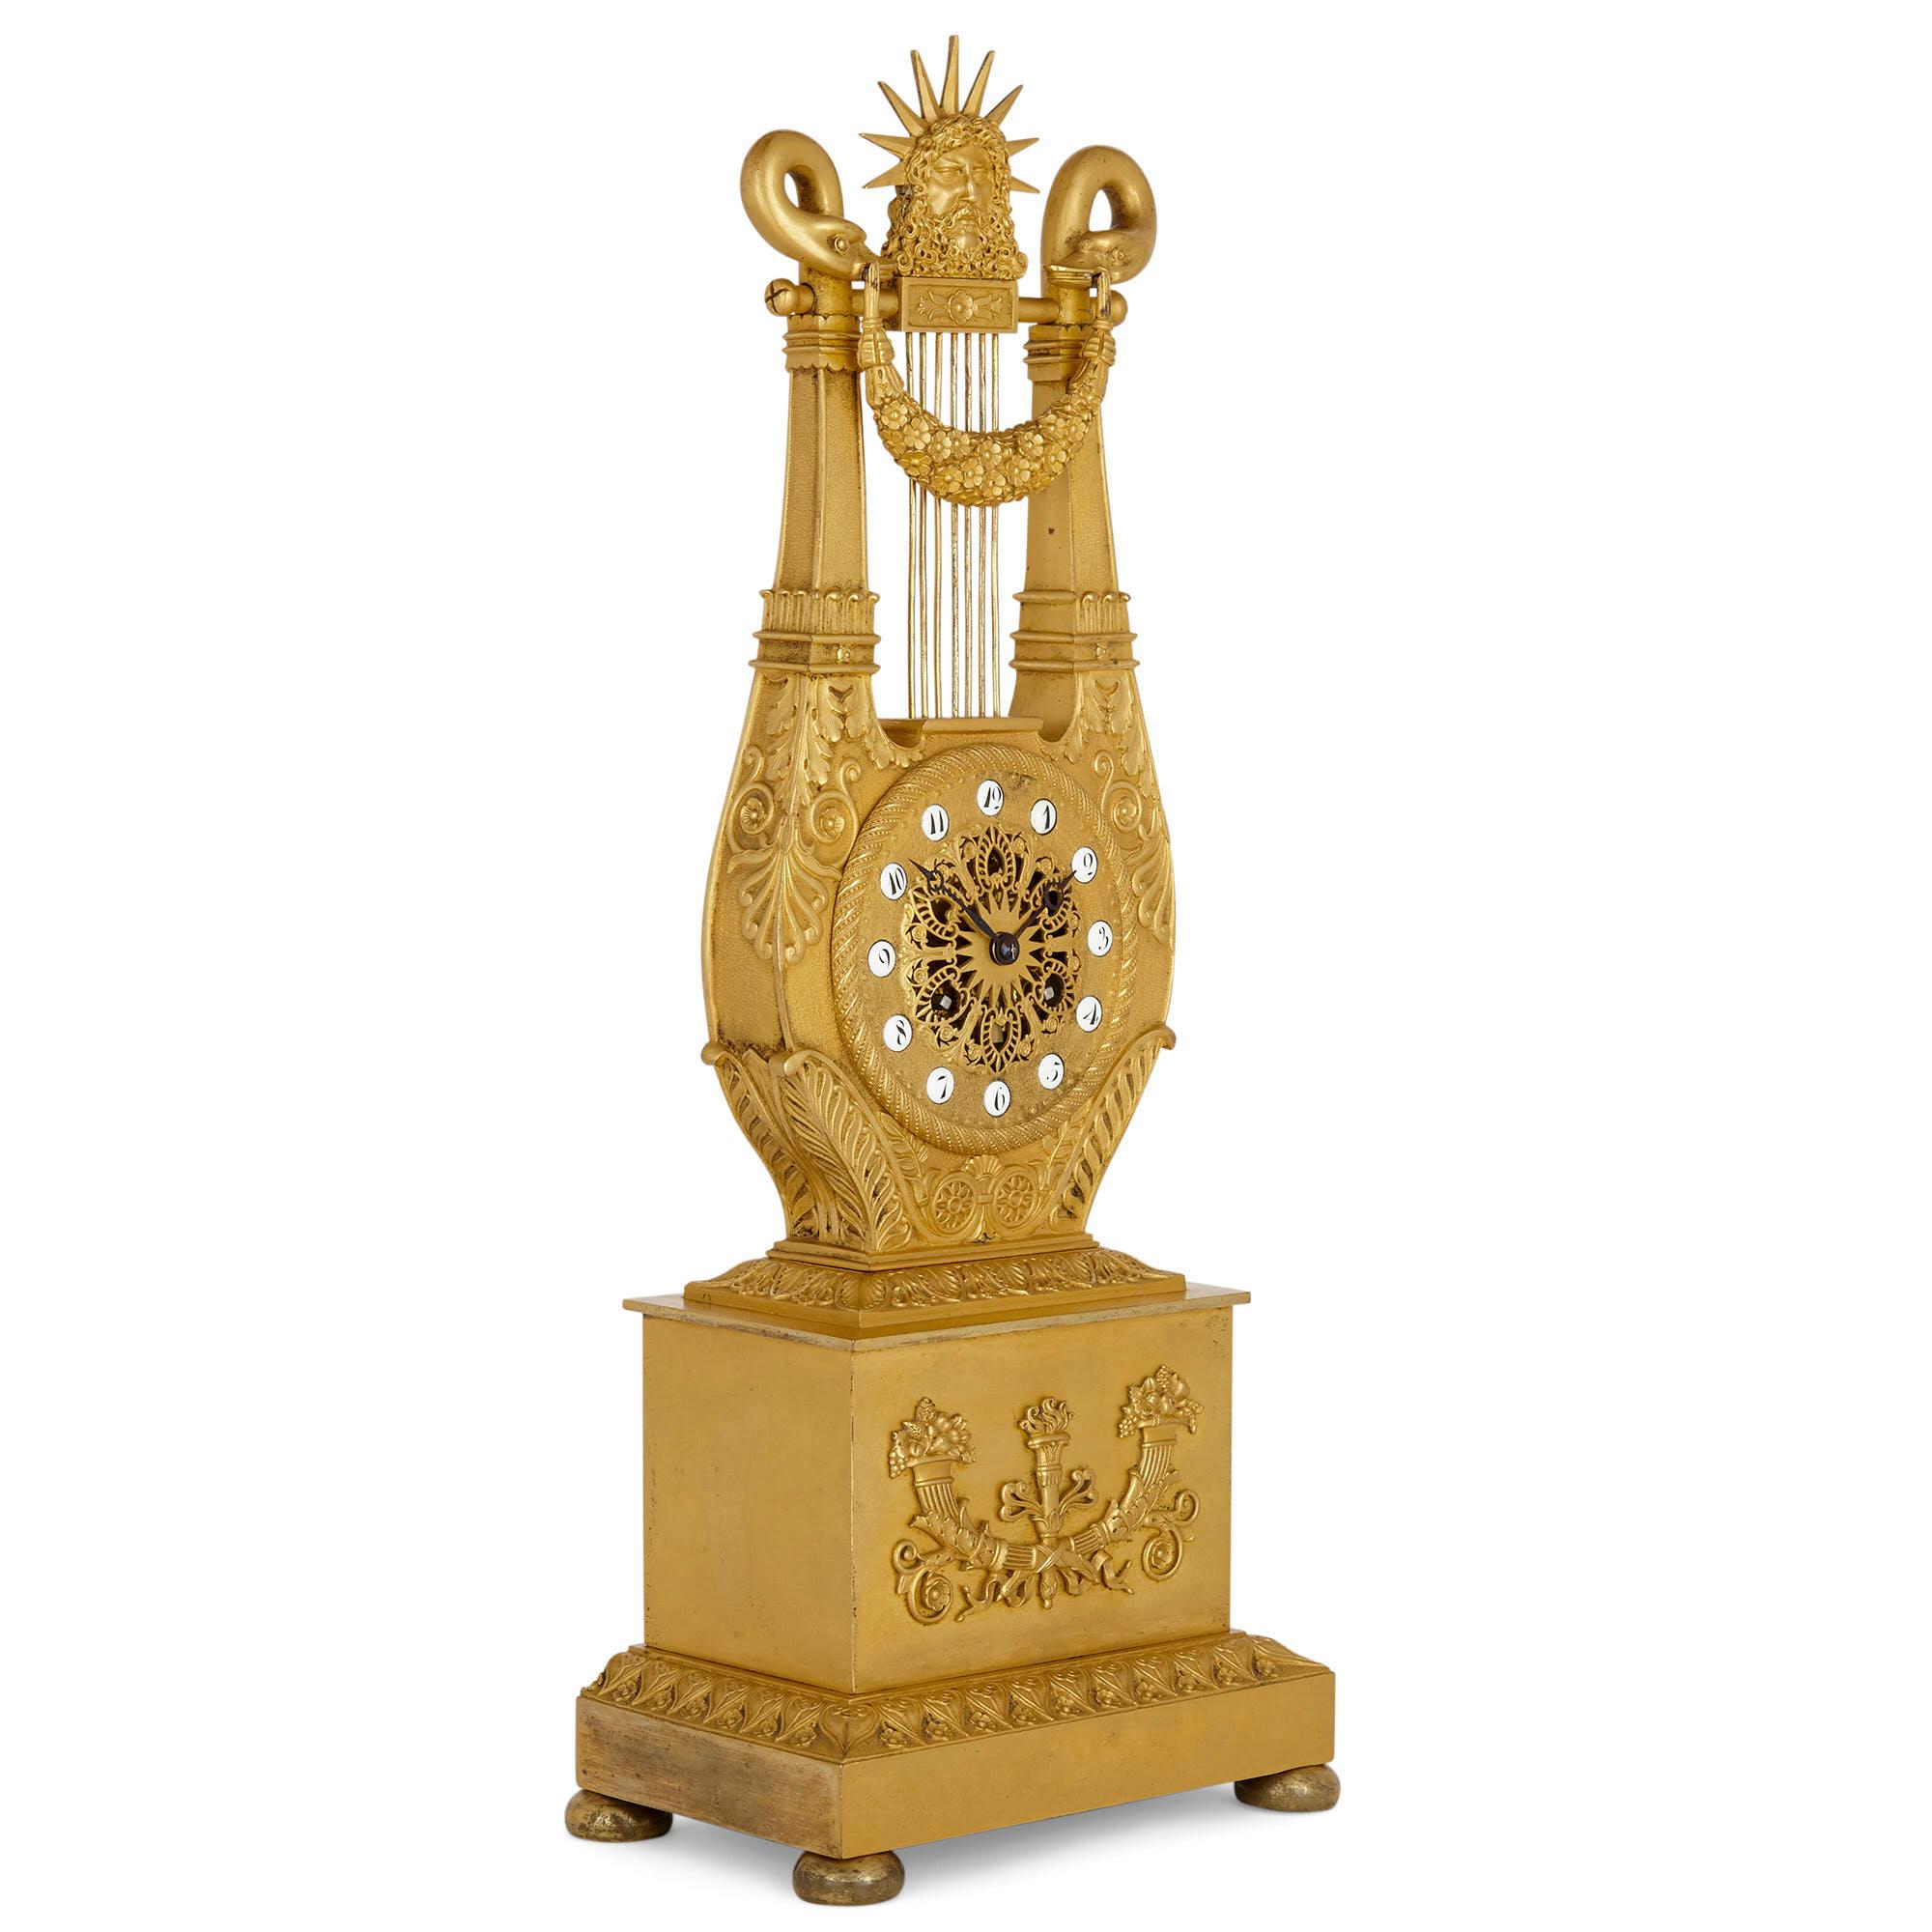 French neoclassical style lyre-form gilt bronze clock
French, 19th century
Measures: Height 50cm, width 19cm, depth 13cm

This wonderful mantel clock, crafted entirely from gilt bronze, is a magnificent example of the Louis XVI style. The clock